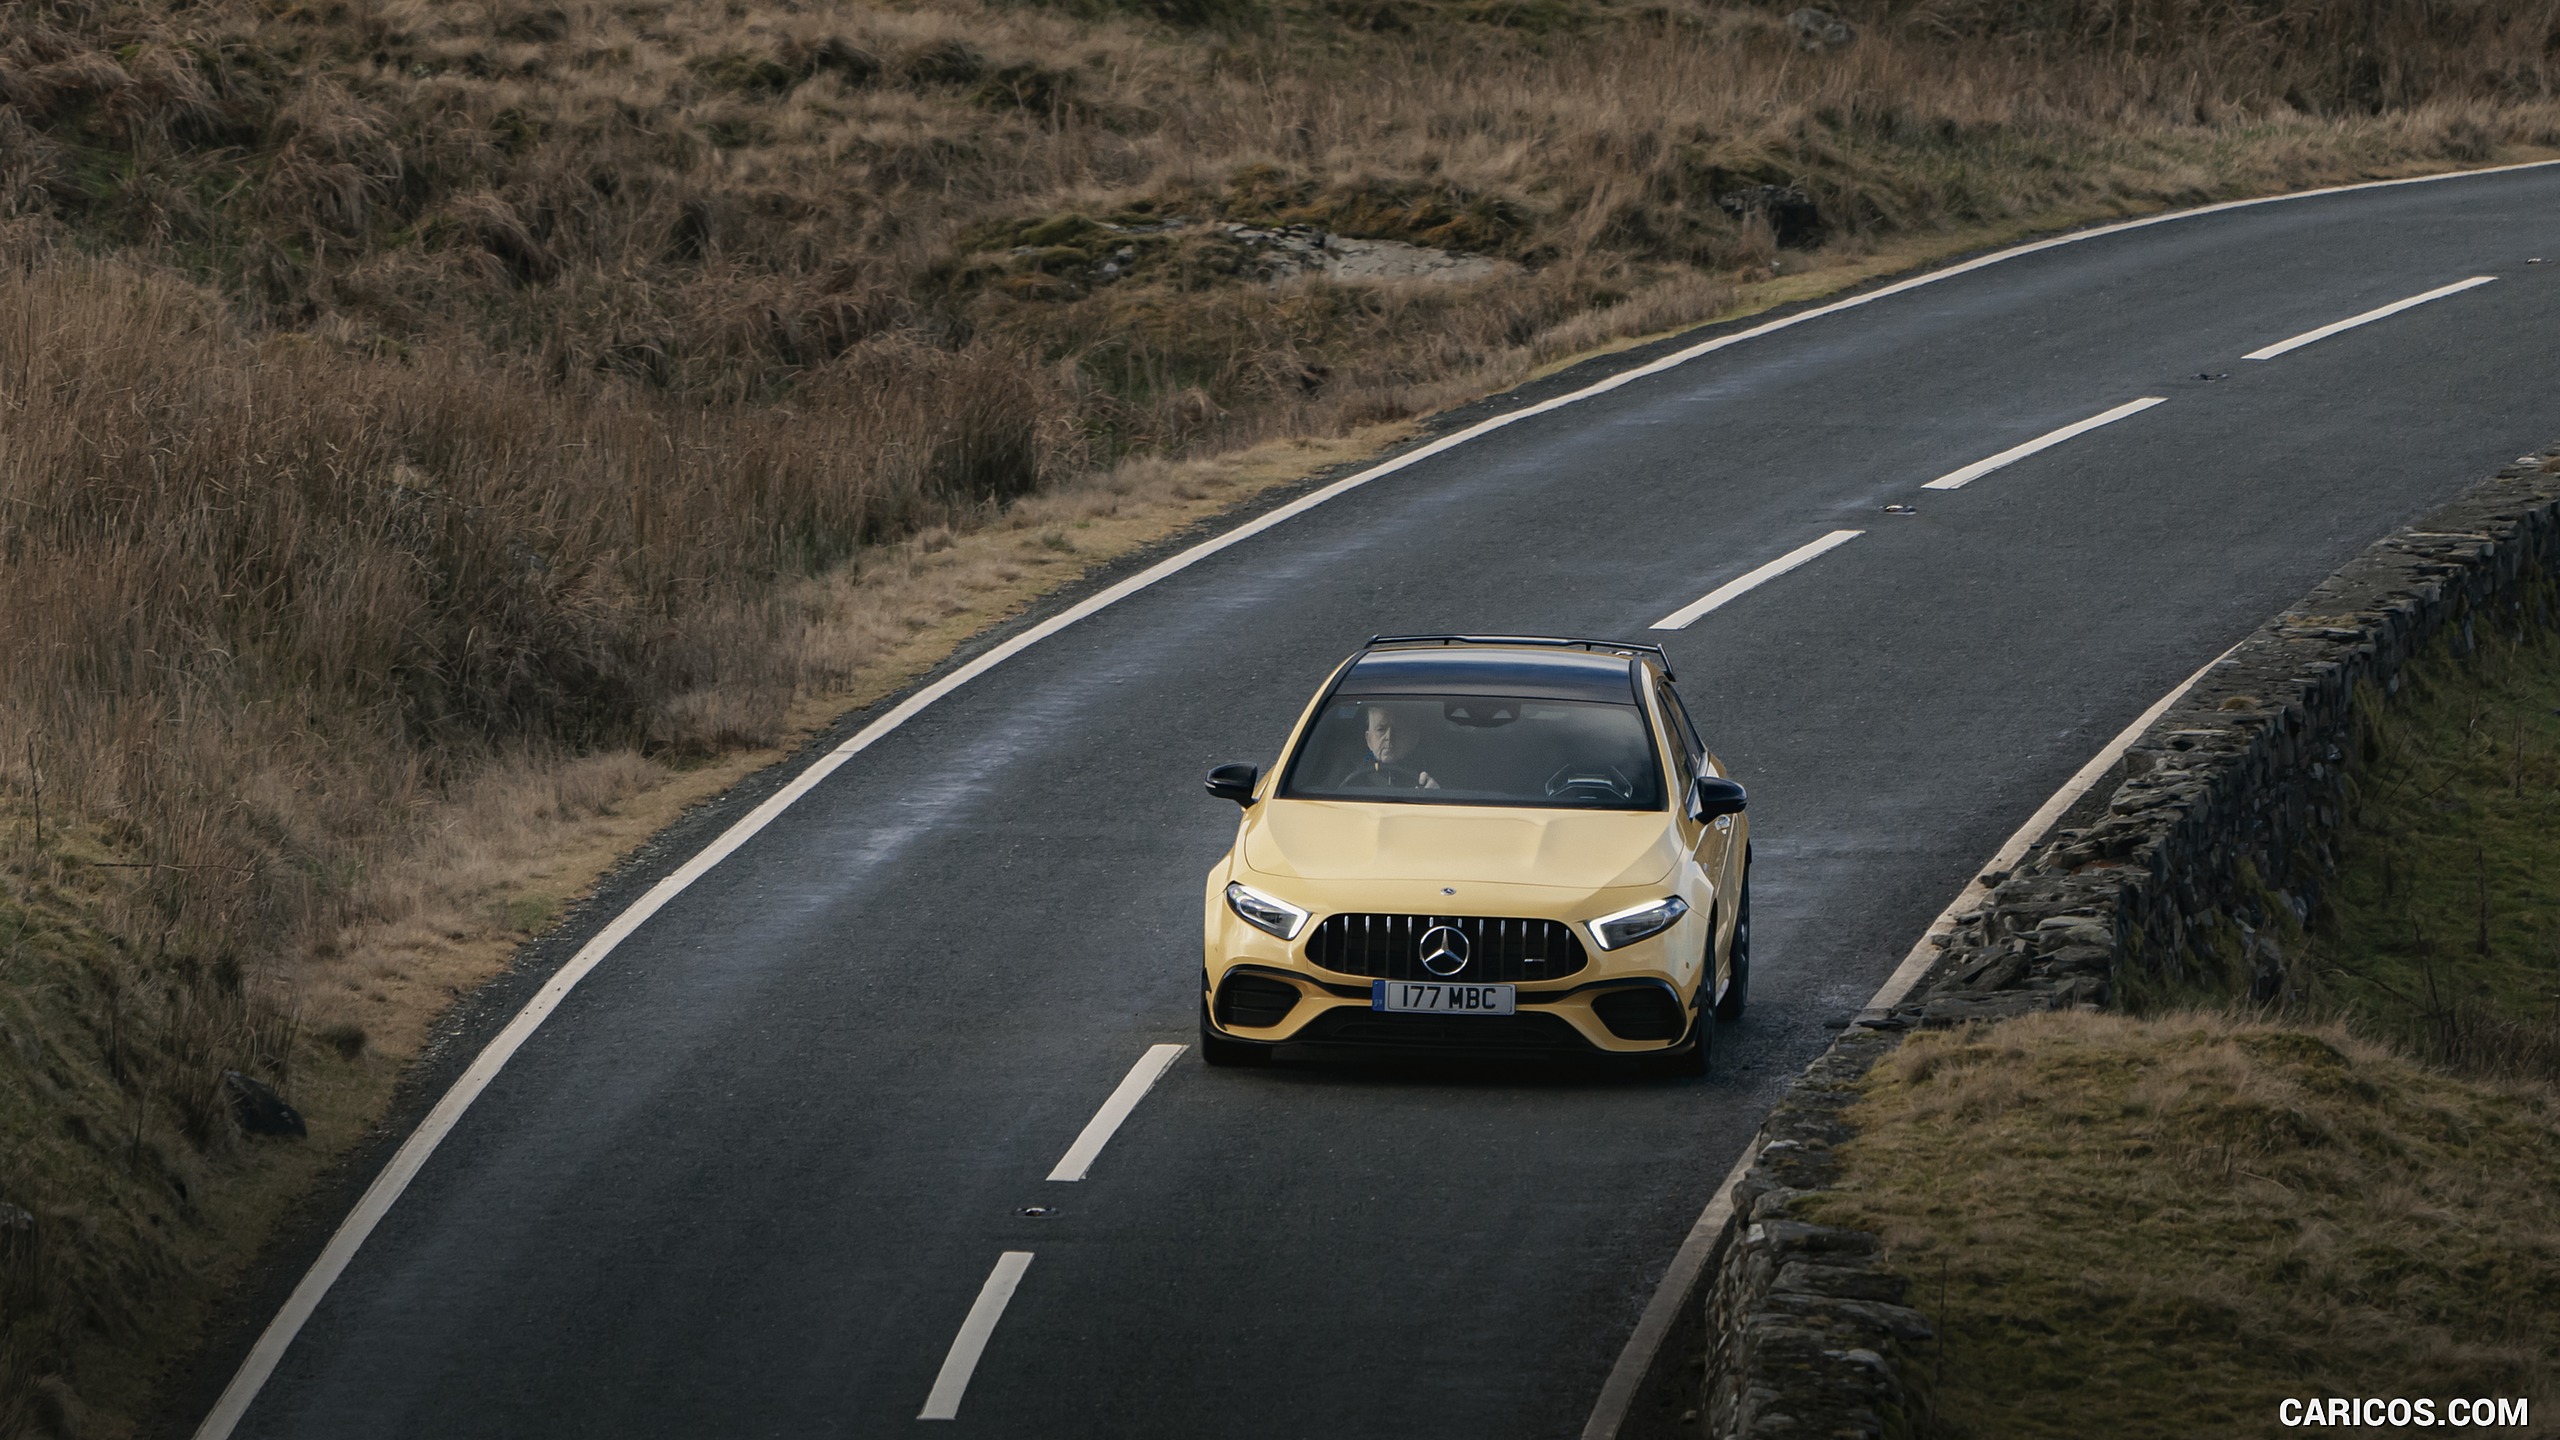 2020 Mercedes-AMG A 45 S (UK-Spec) - Front, #147 of 188